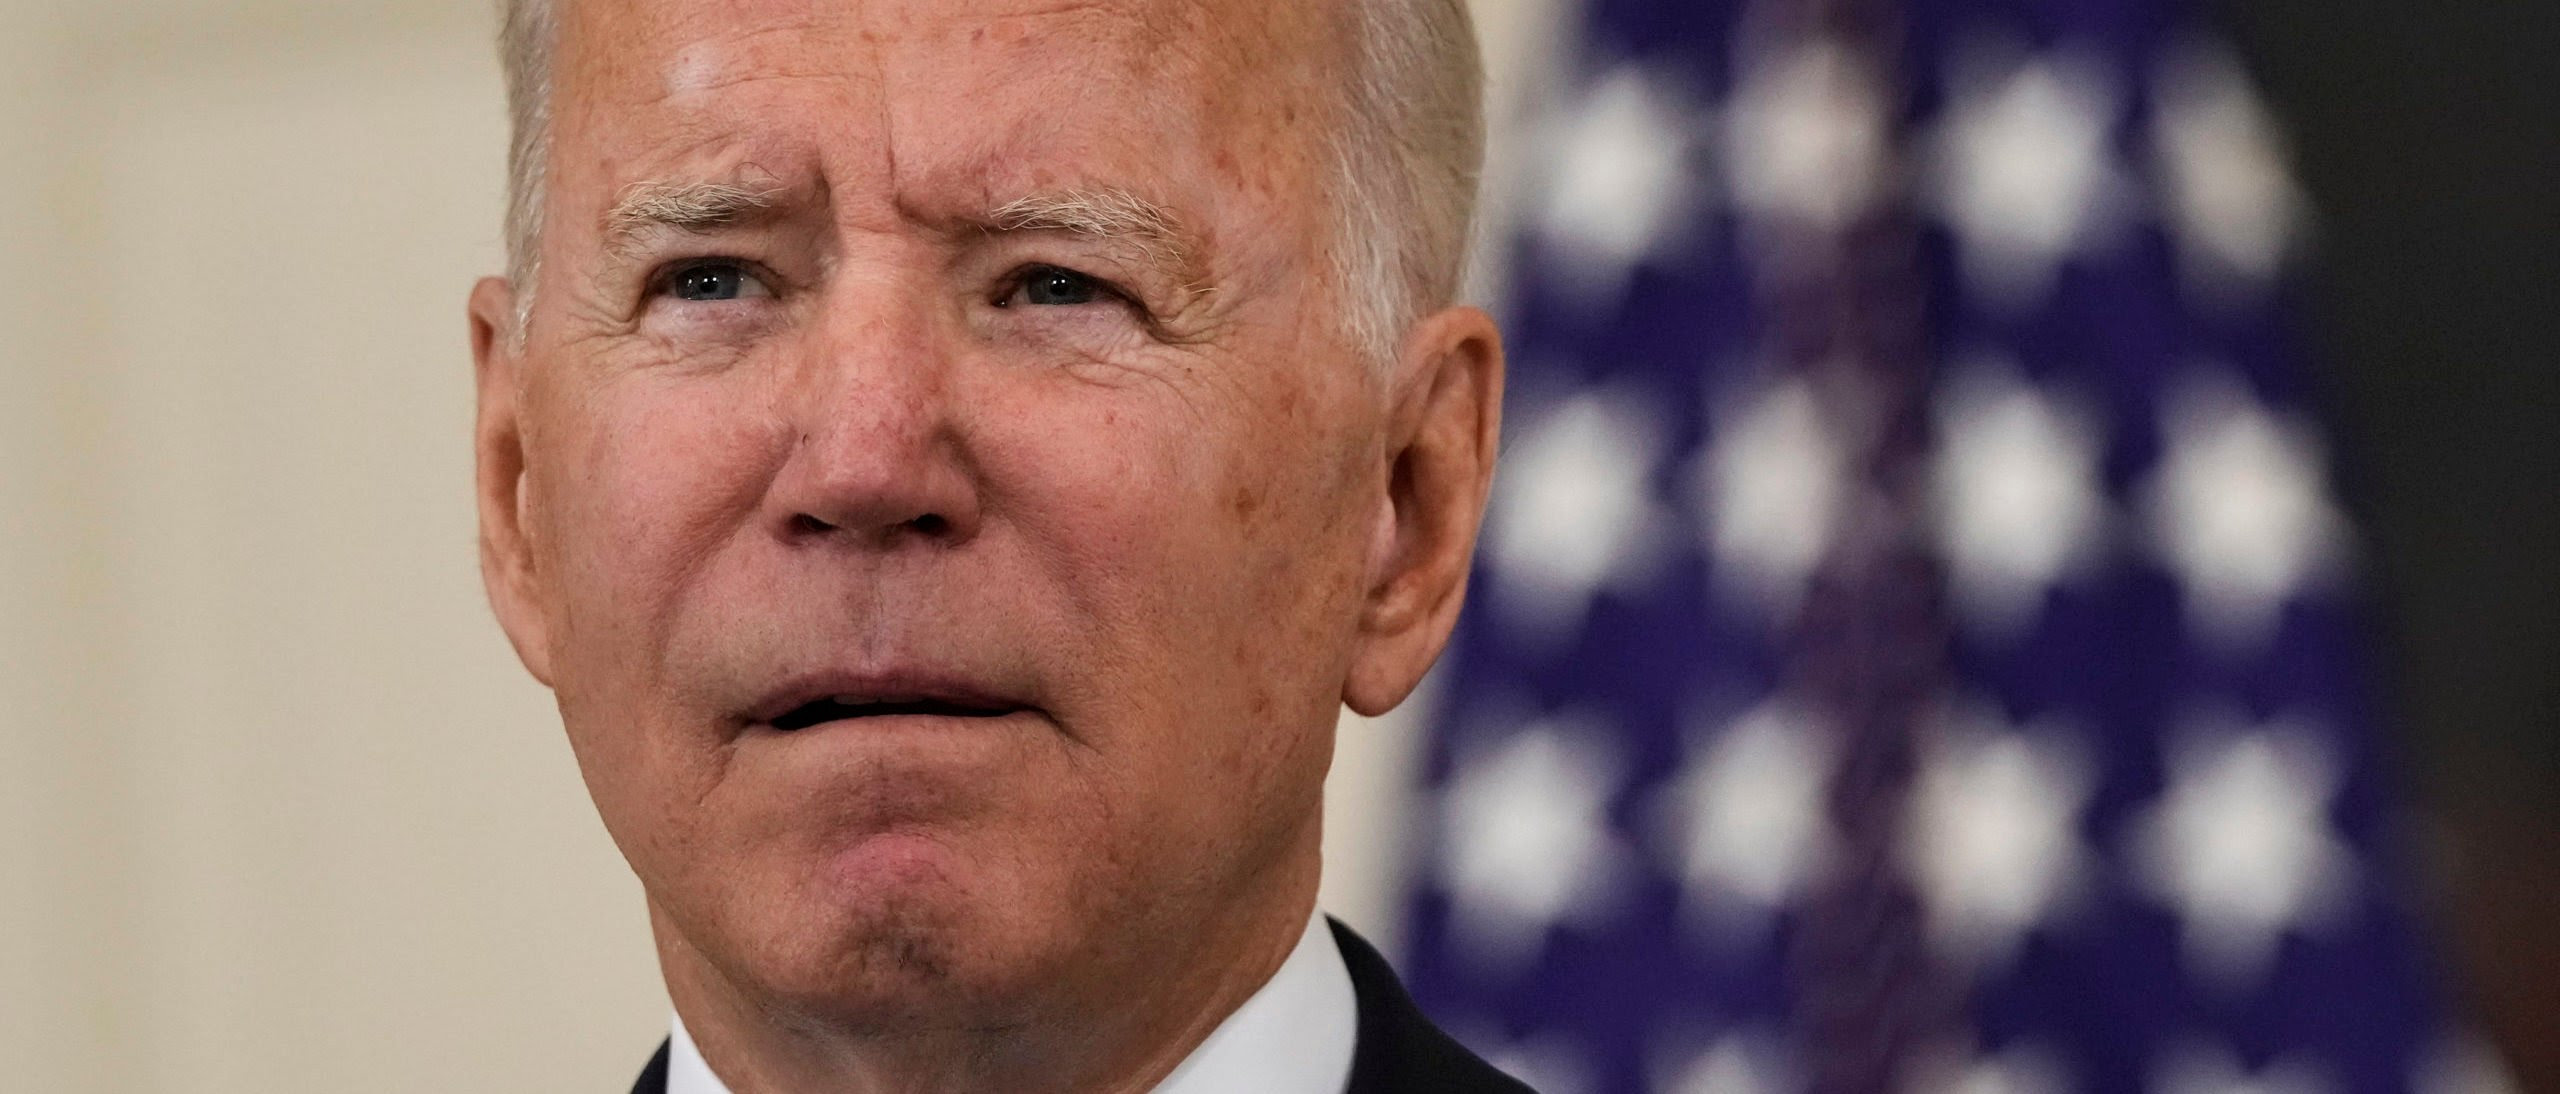 Judicial Watch, Daily Caller News Foundation Score Victory In Lawsuit Over Biden’s Senate Records